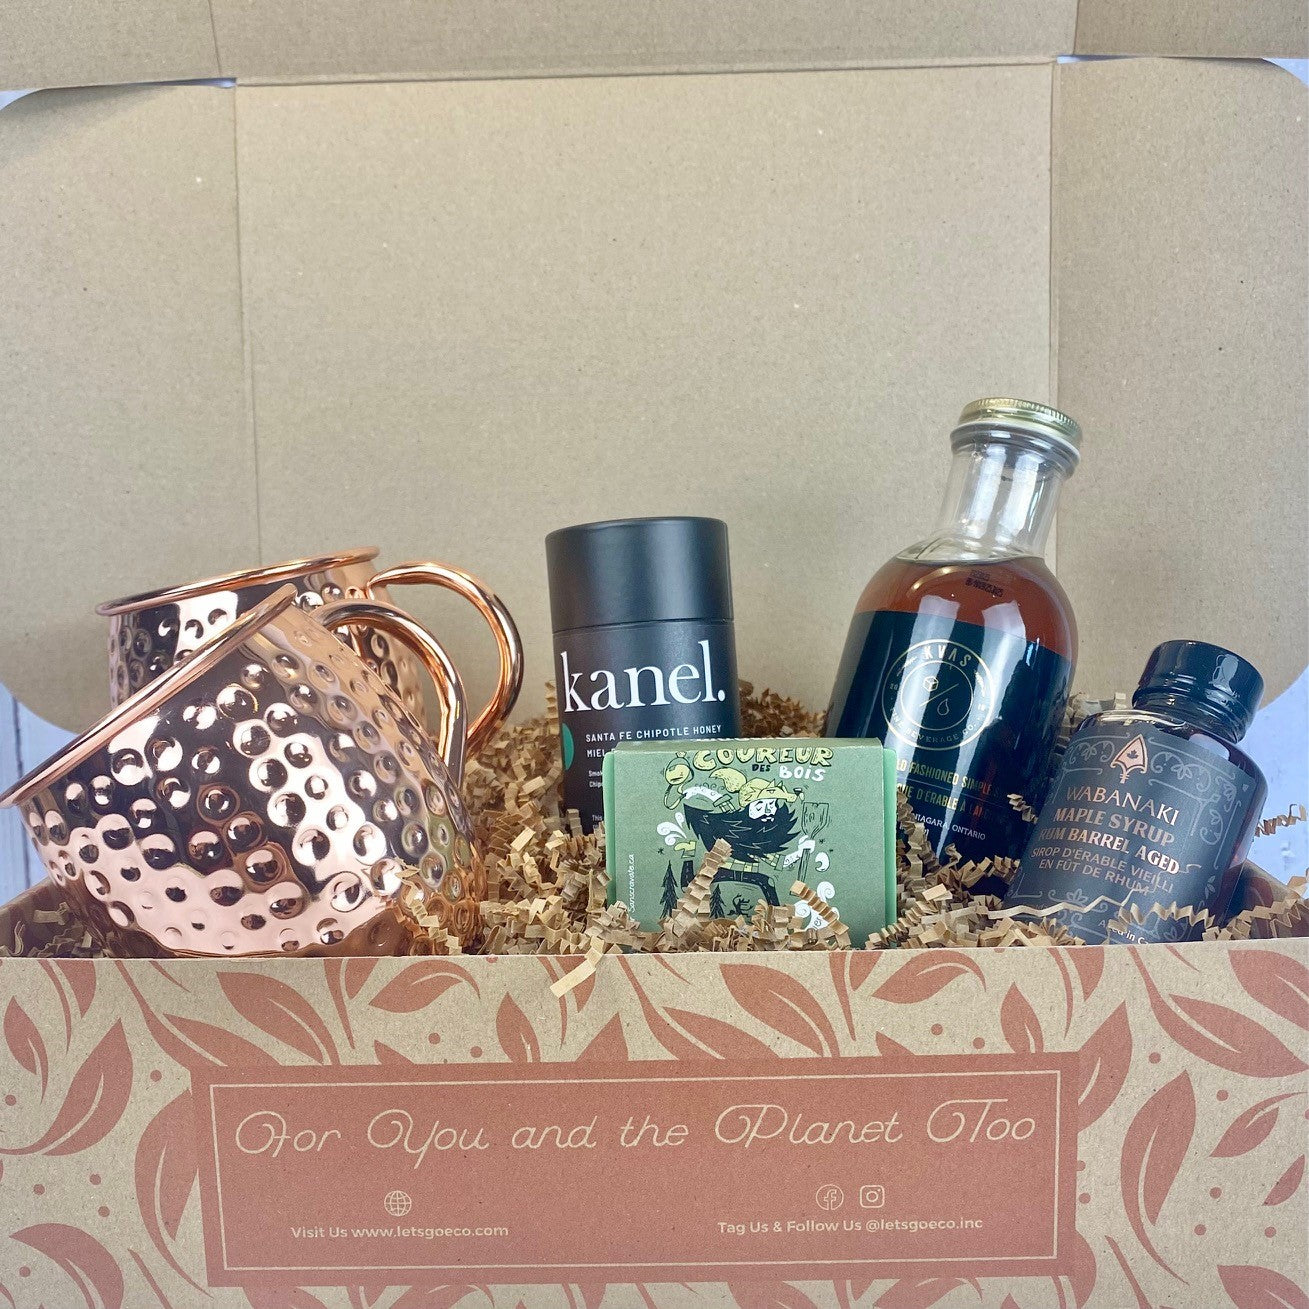 Gift Box "Artisan Man" - Cocktail Syrup, Maple Syrup, BBQ Spice, Soap and Mugs